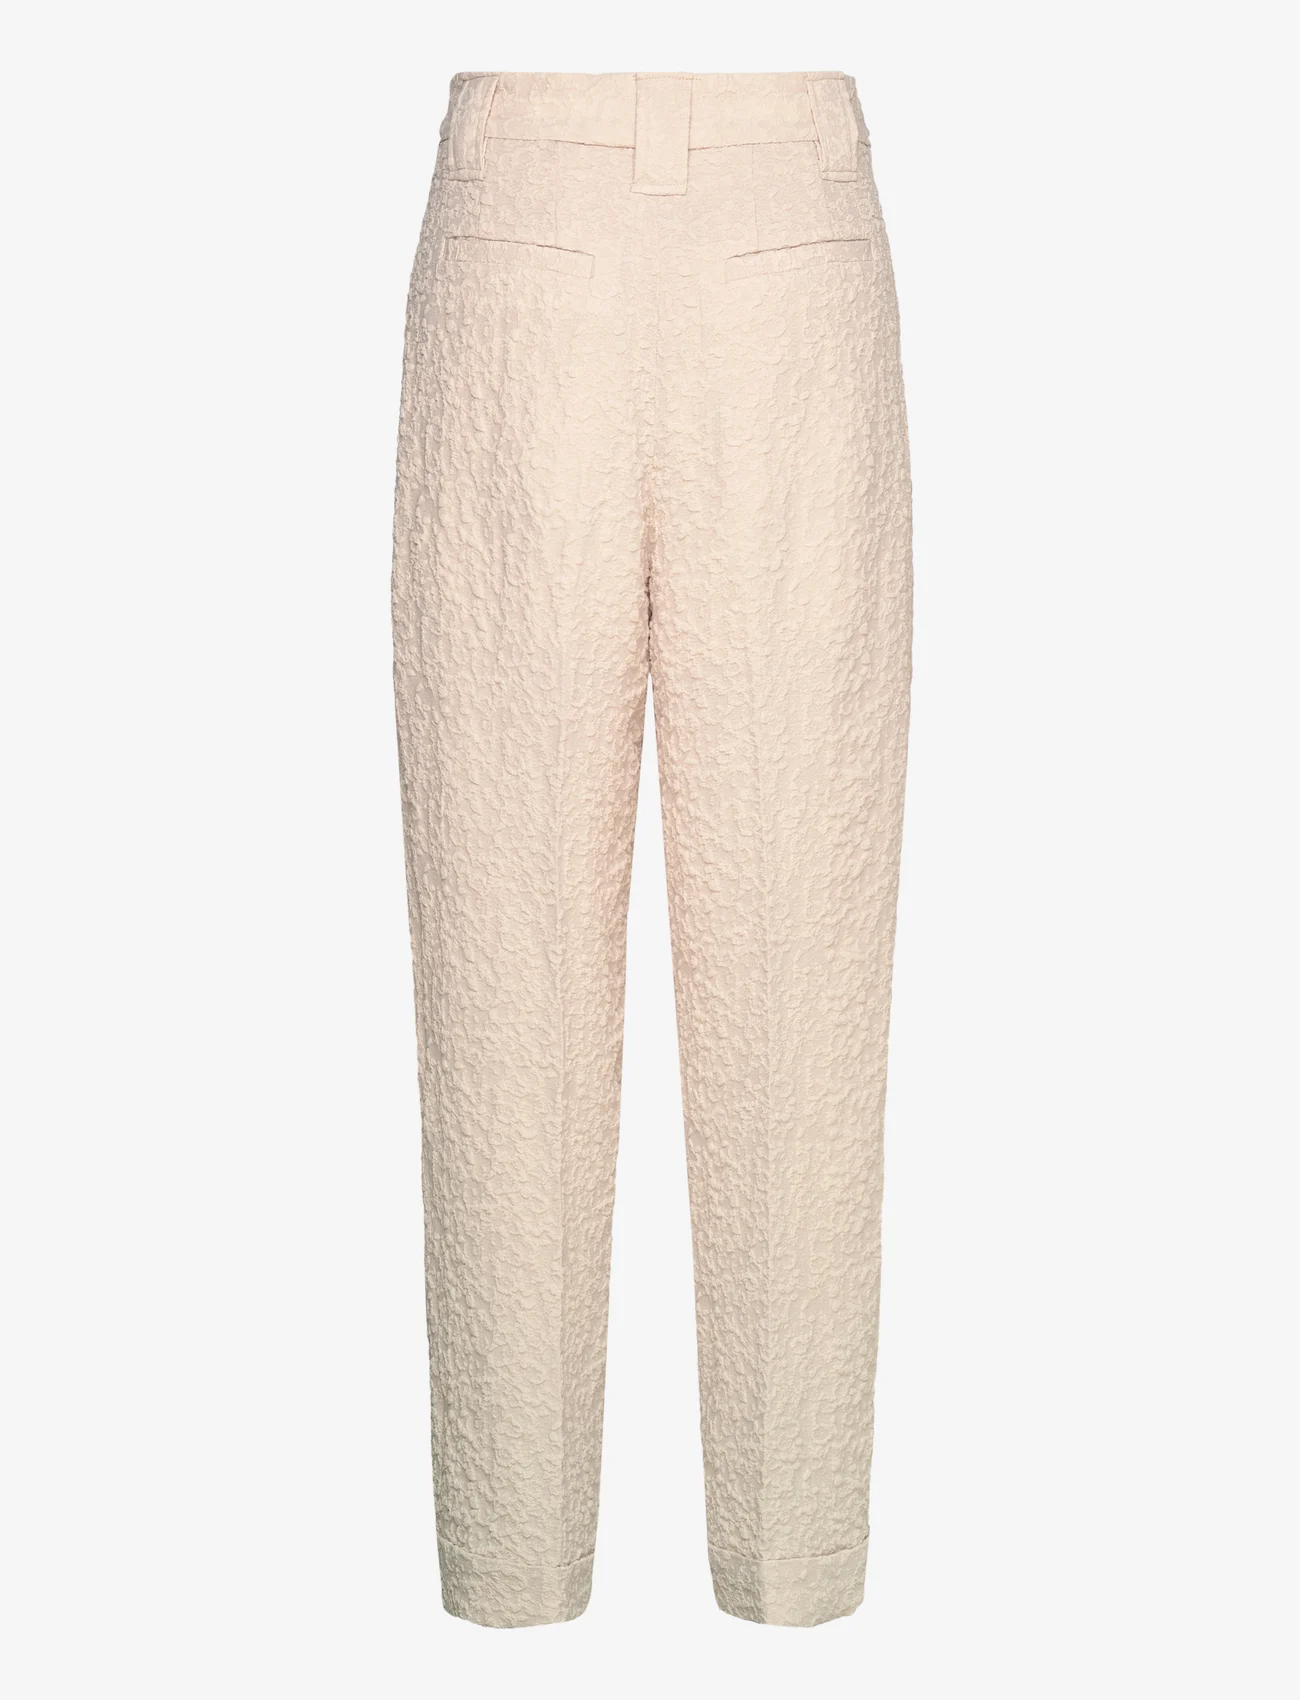 Ganni - Textured Suiting - straight leg trousers - oyster gray - 1